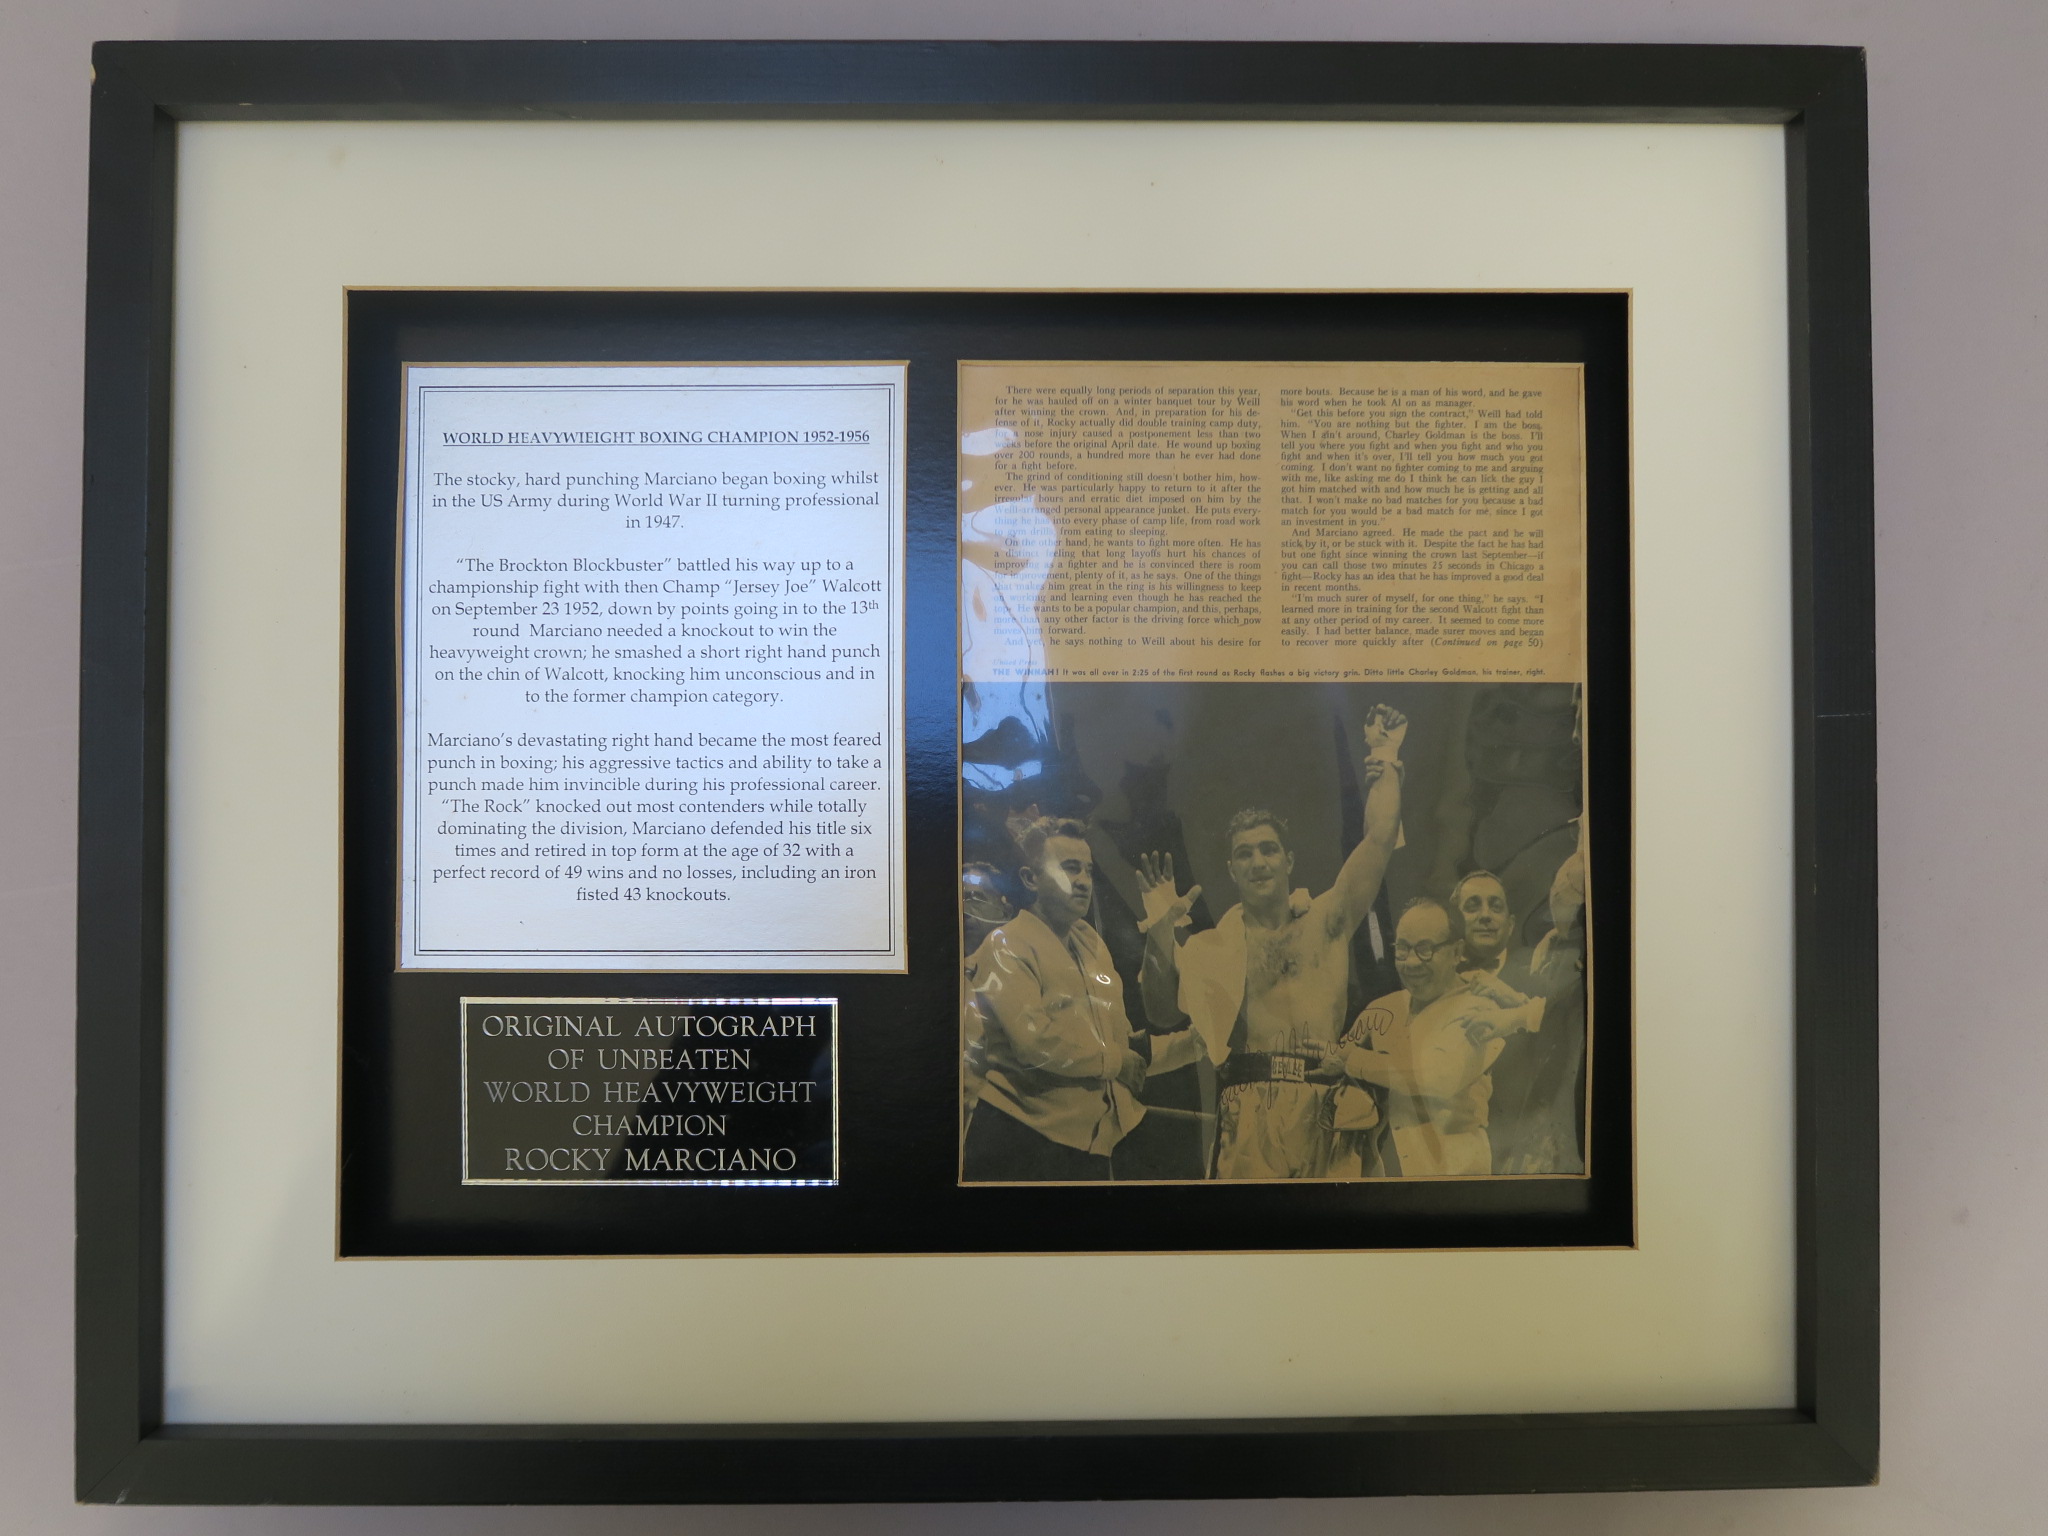 Rocky Marciano original autograph of the unbeaten World Heavyweight Champion. The autograph is on